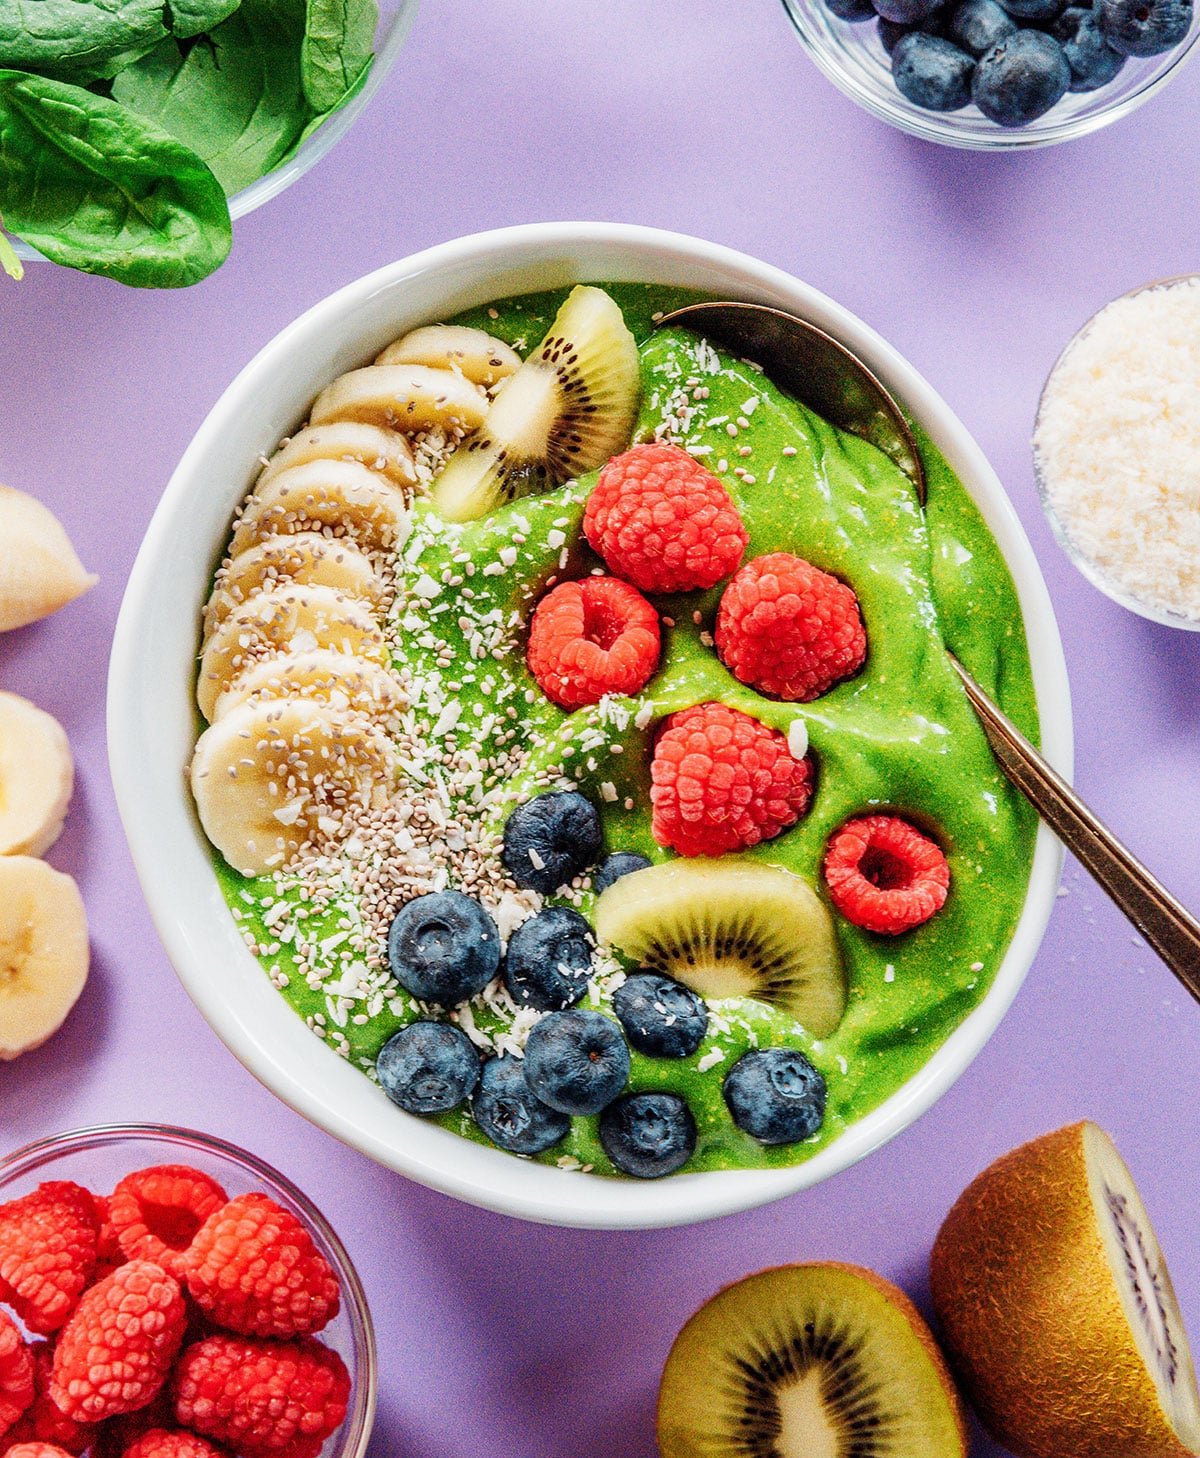 Green smoothie bowl with bananas, kiwi, blueberries, raspberries, coconut, and seeds on top.